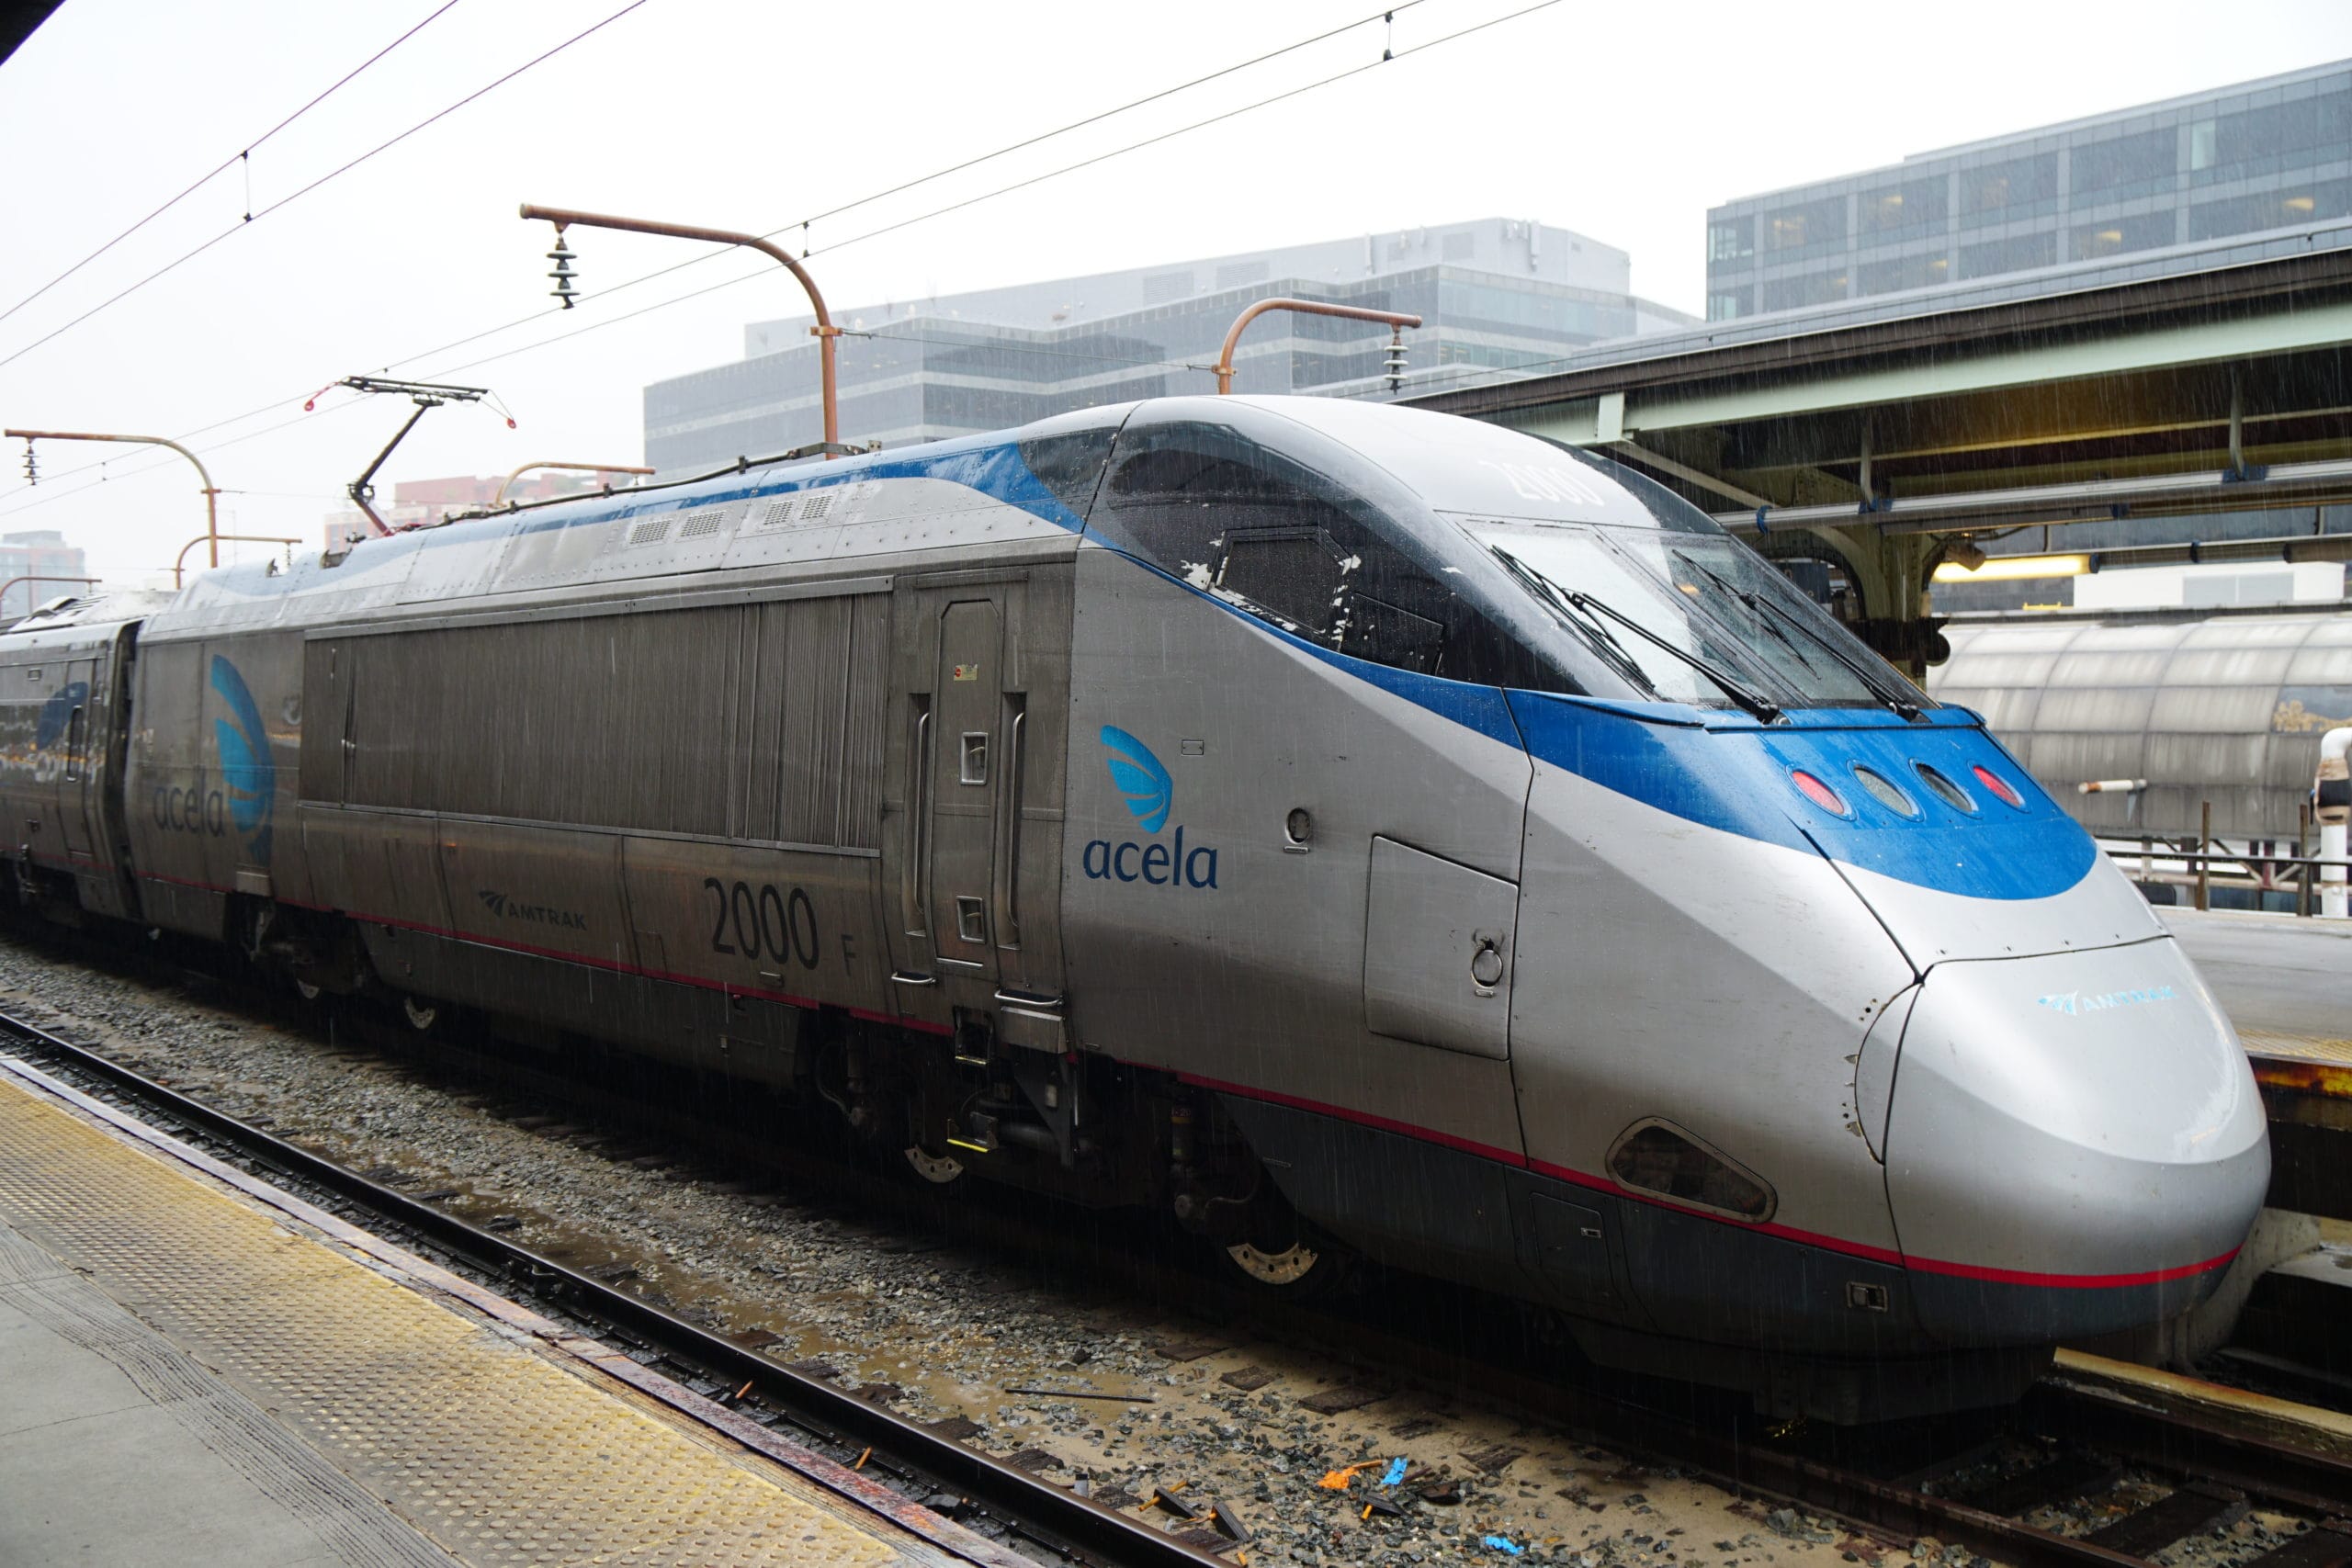 Amtrak Acela Express train stopped at Union Station in August 2019.